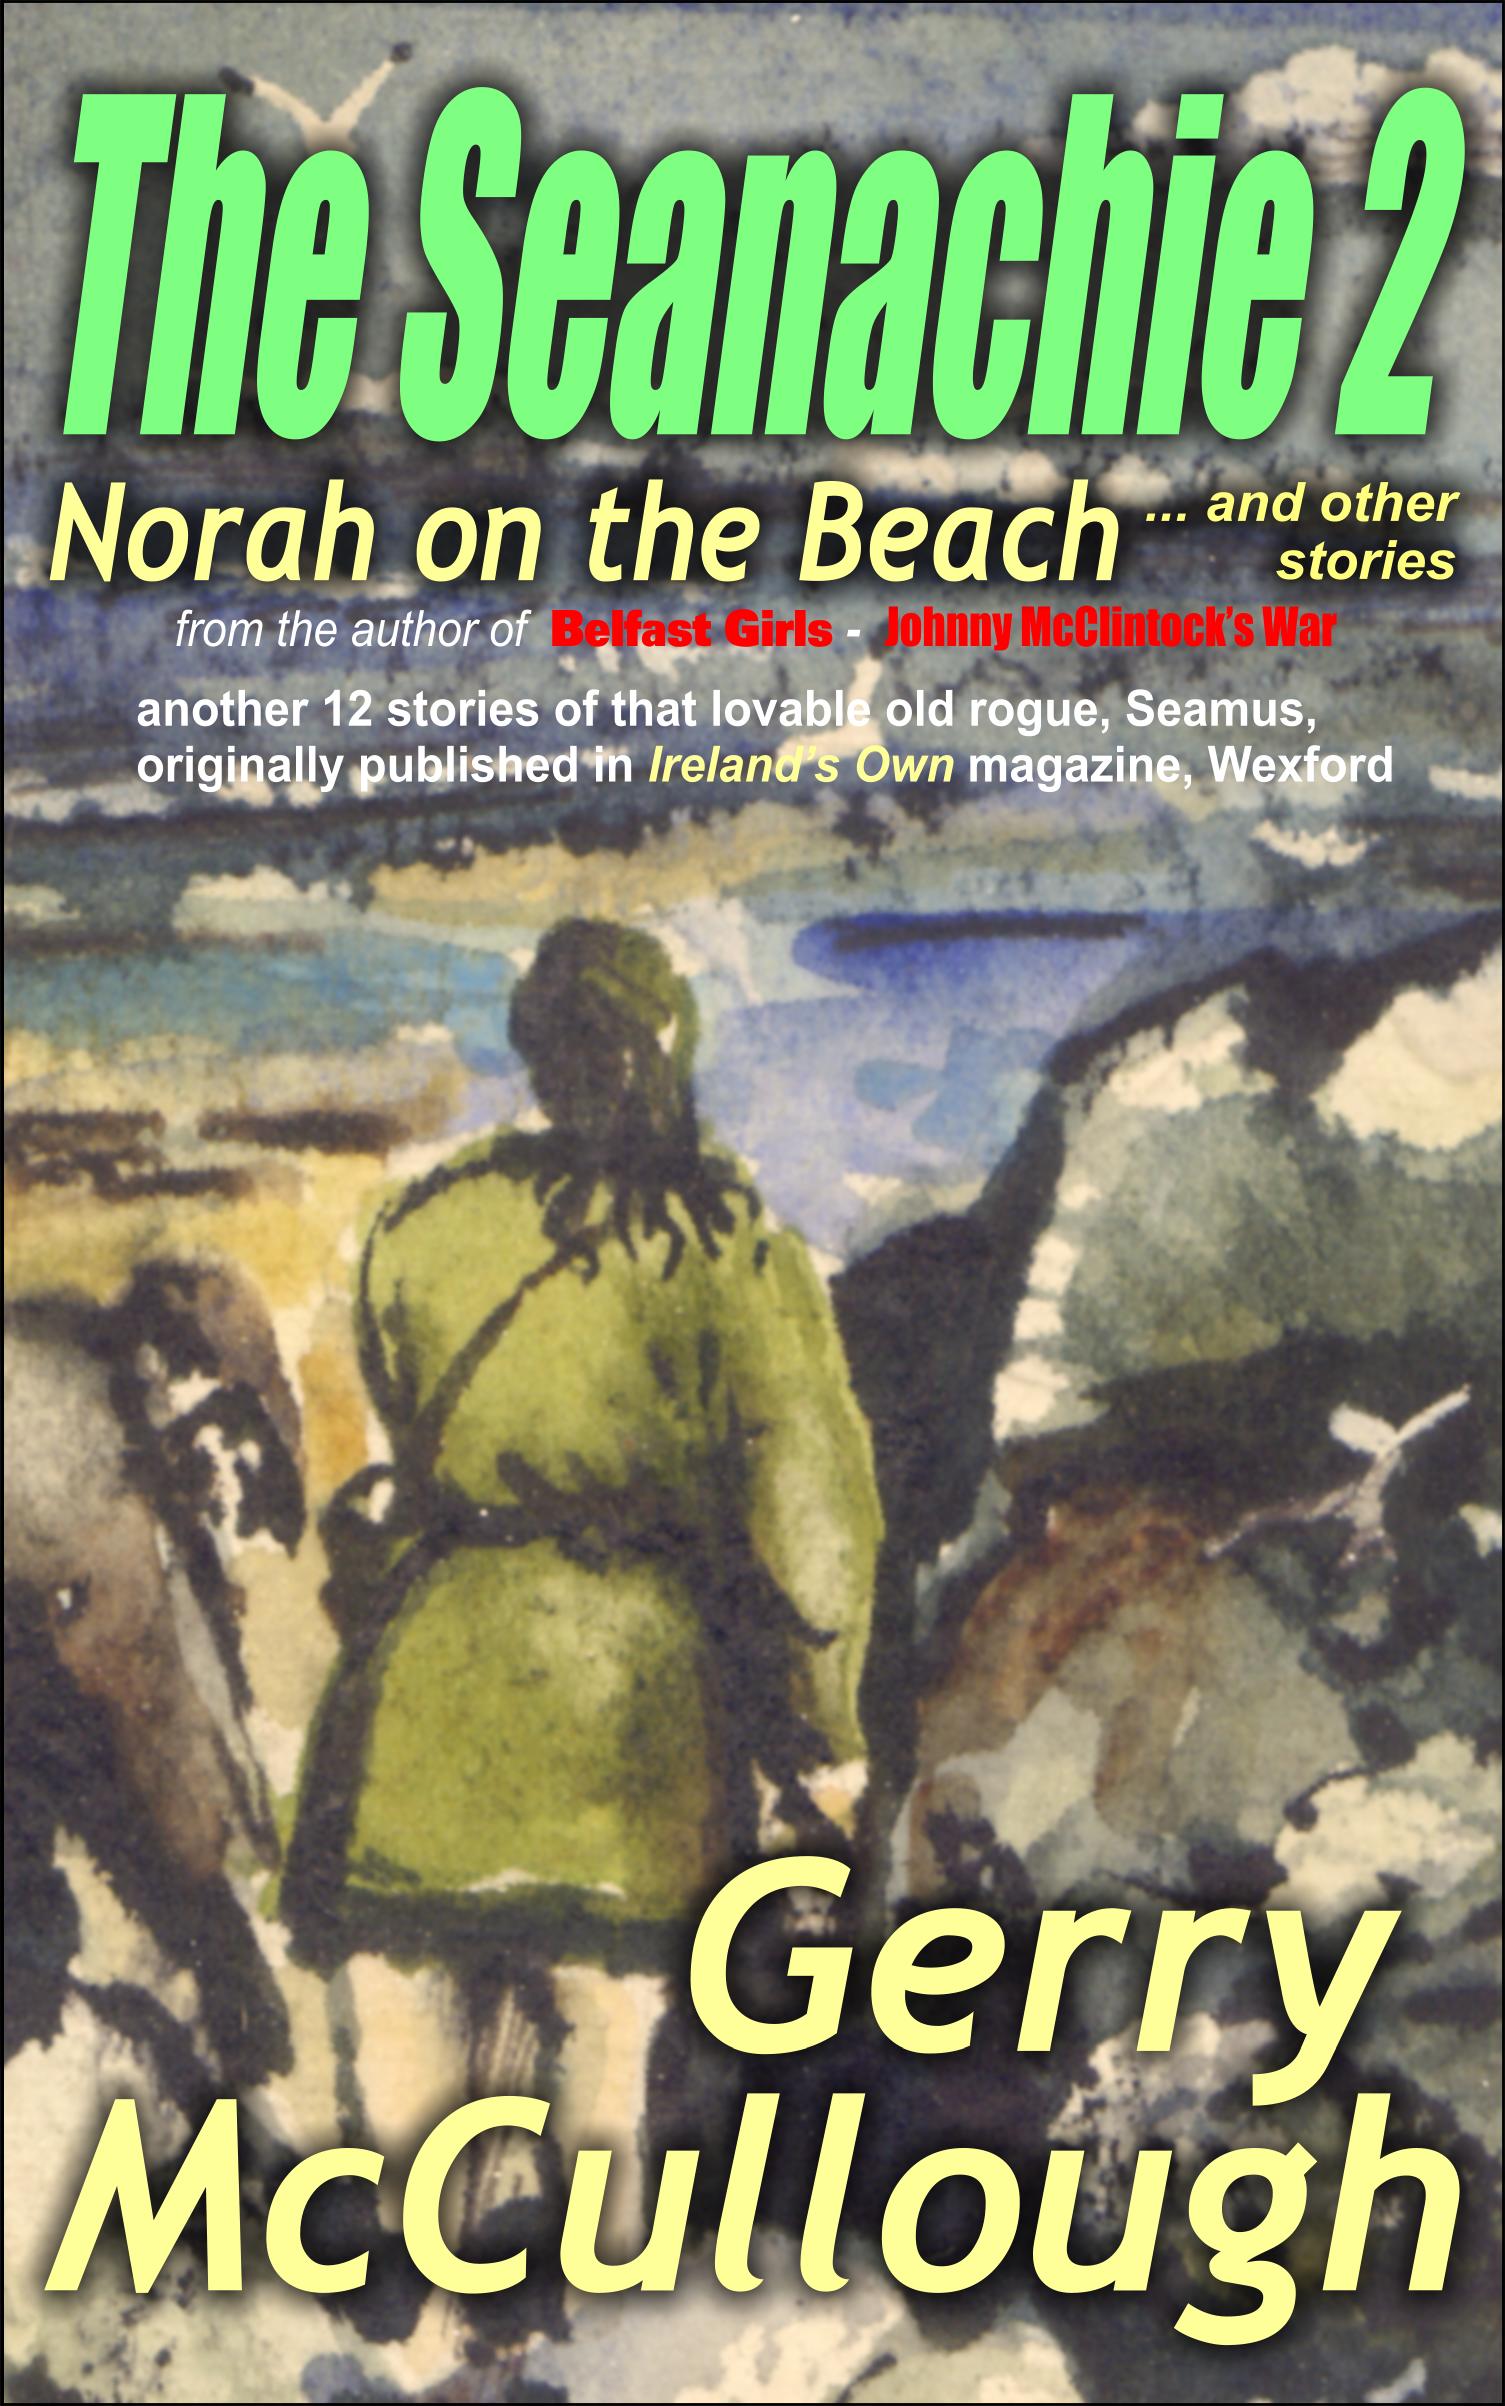 Buy 'The Seanachie 2: Norah on the Beach and other stories from Amazon & other outlets